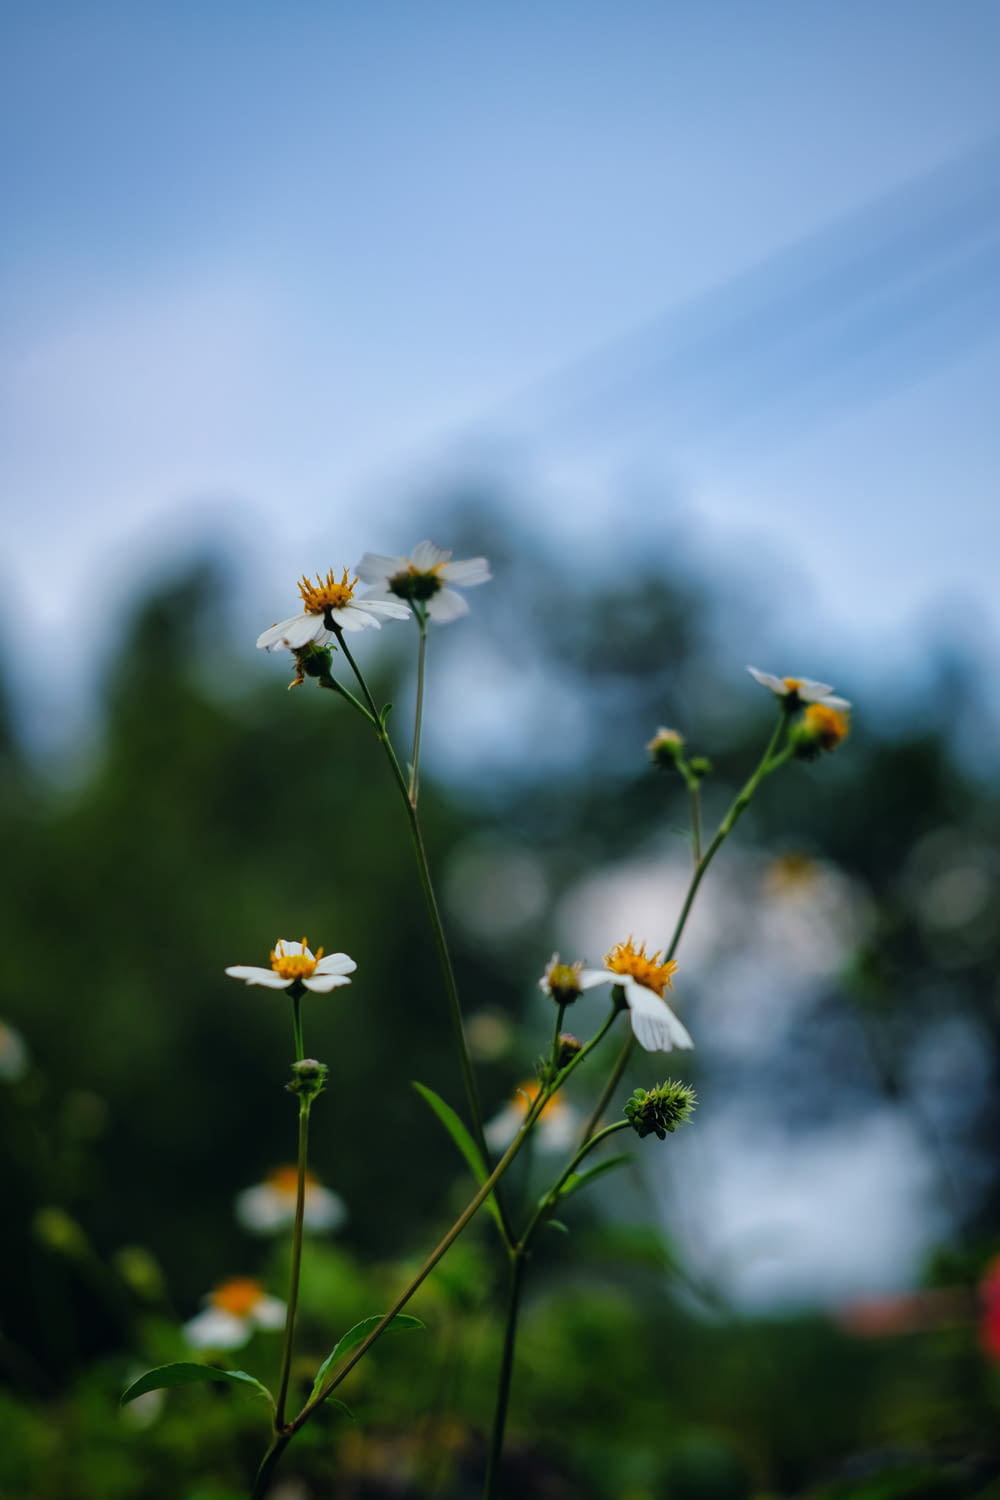 a group of daisies in a field with trees in the background